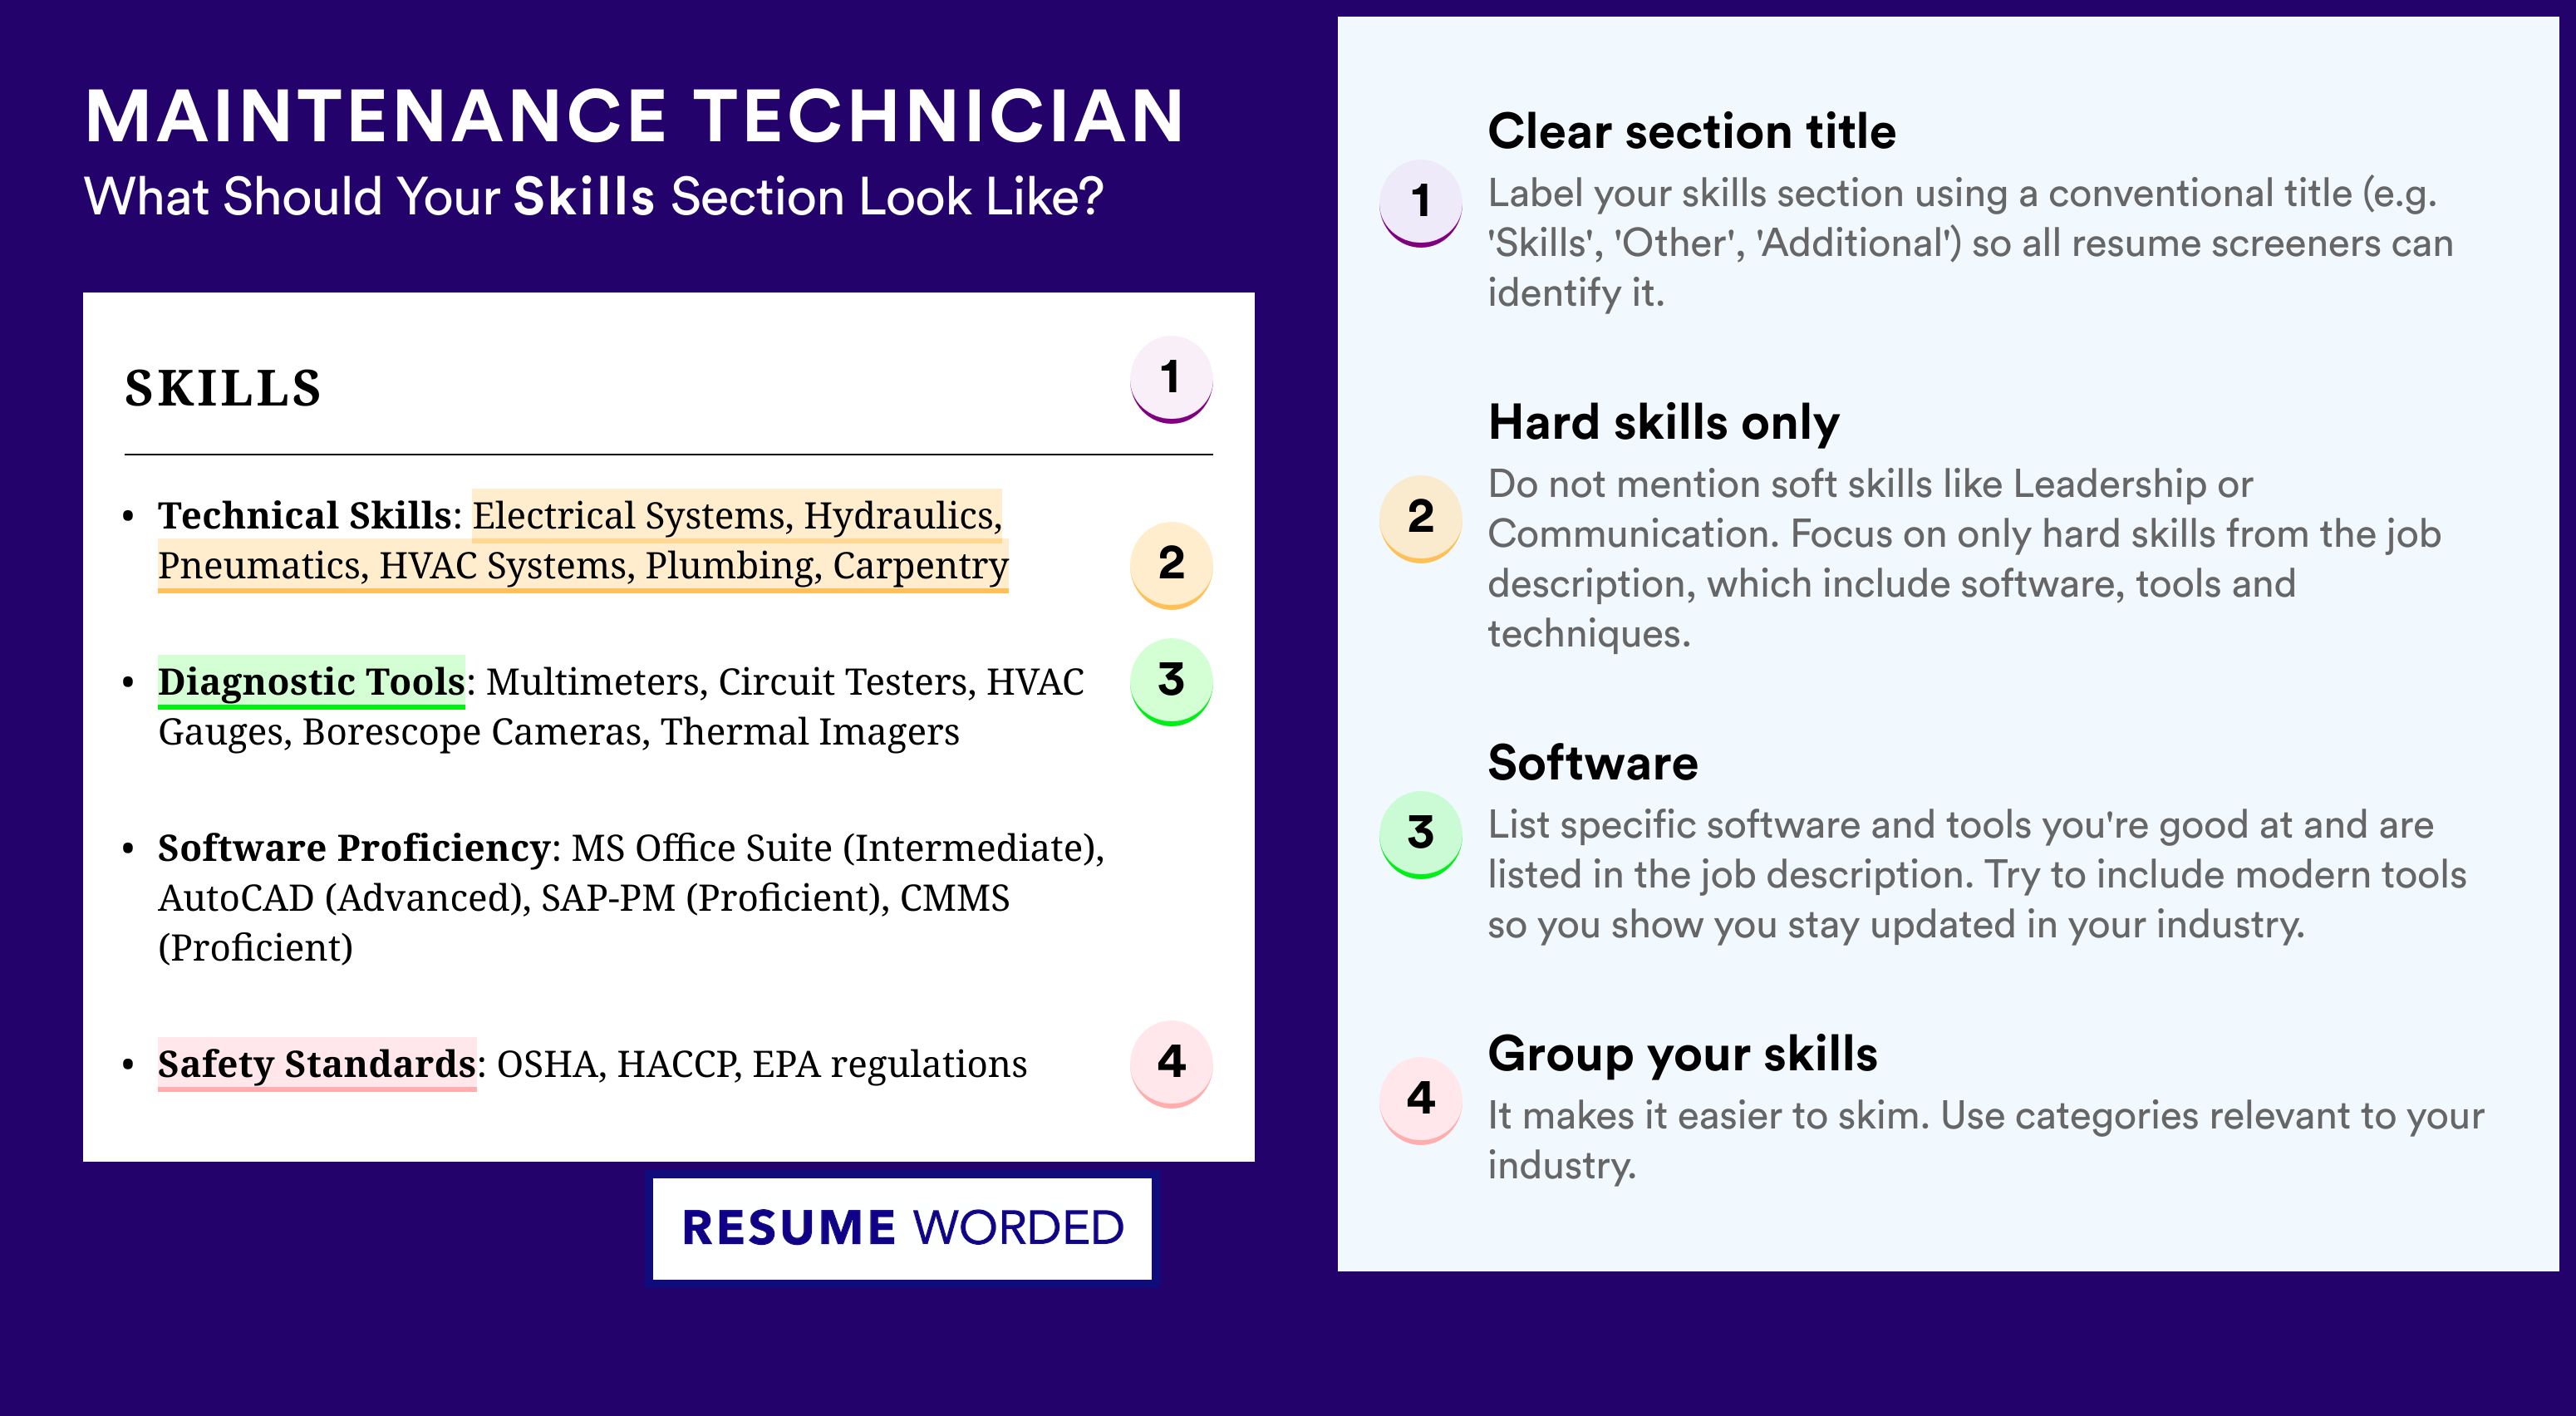 How To Write Your Skills Section - Maintenance Technician Roles